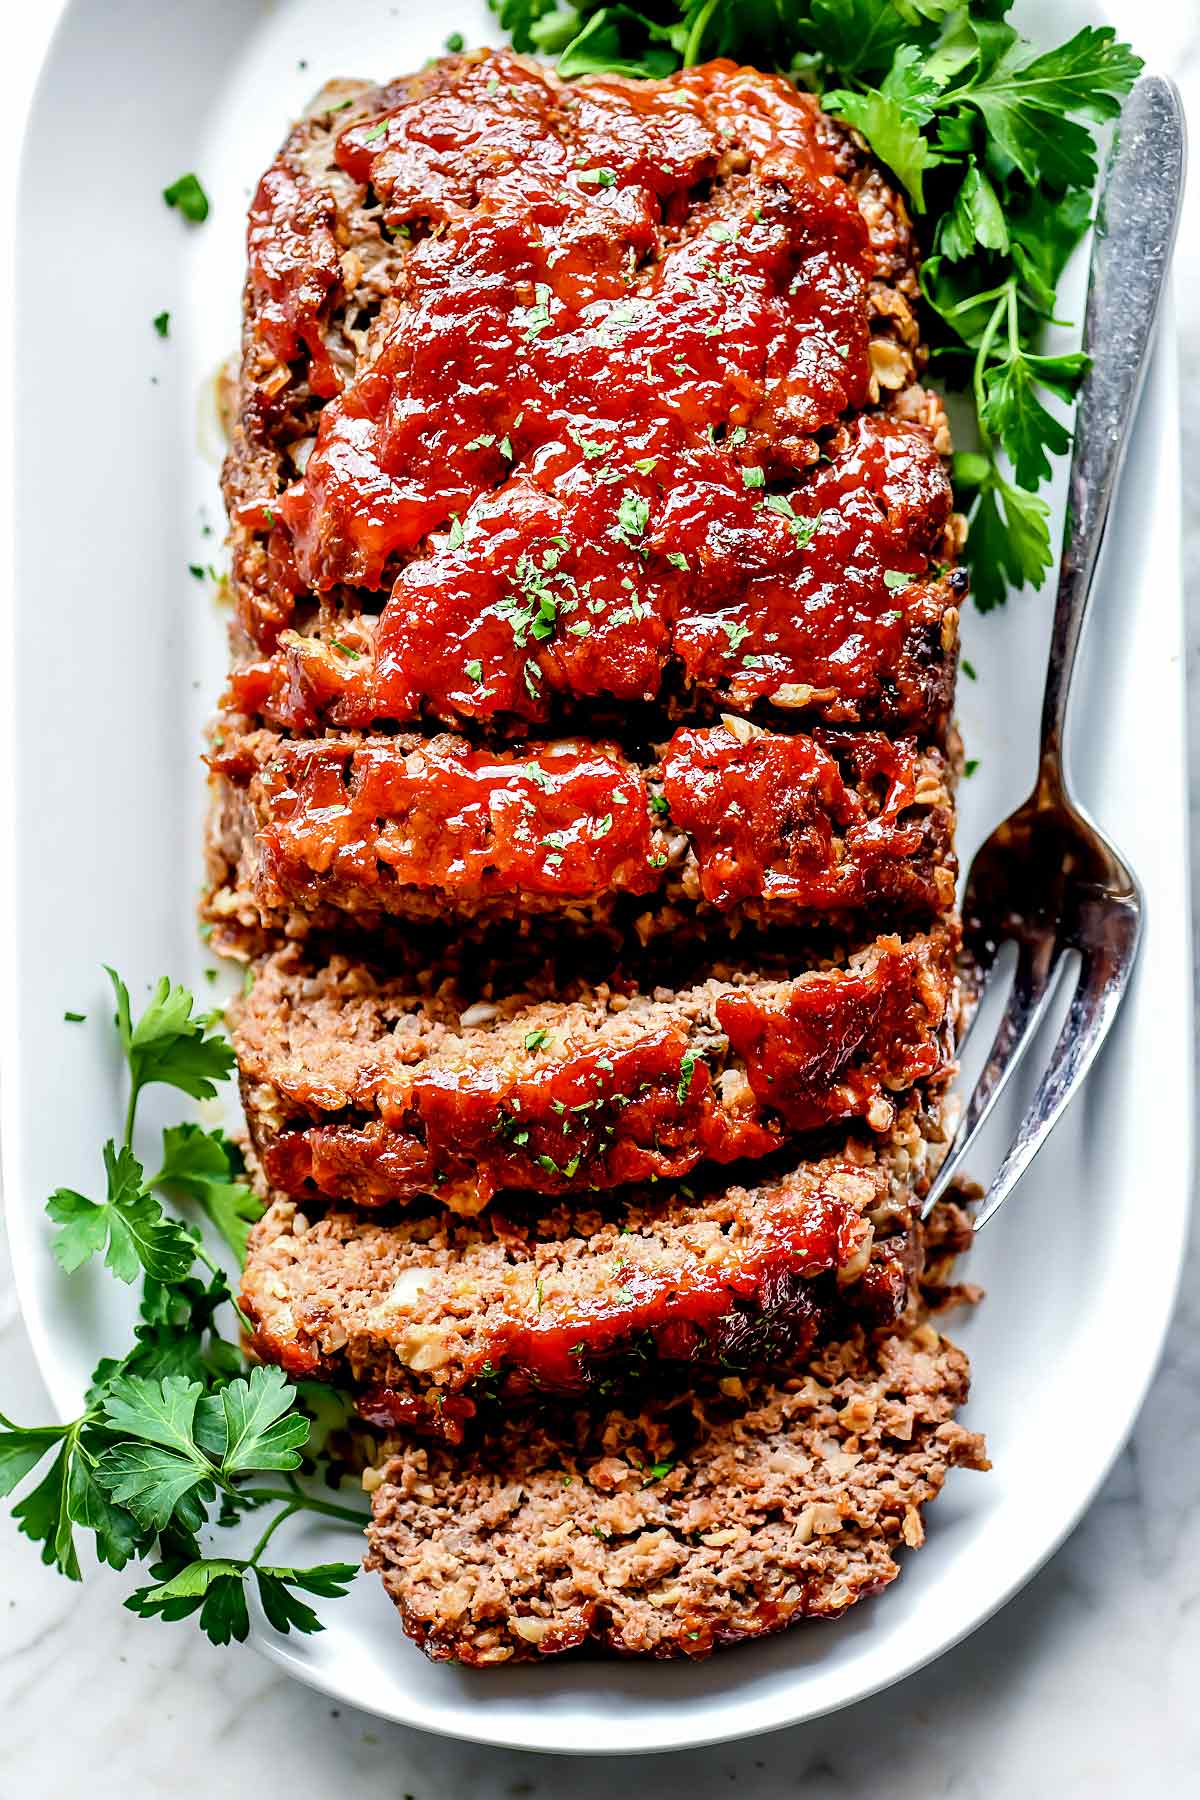 How to Make THE BEST Easy Meatloaf Recipe | foodiecrush.com